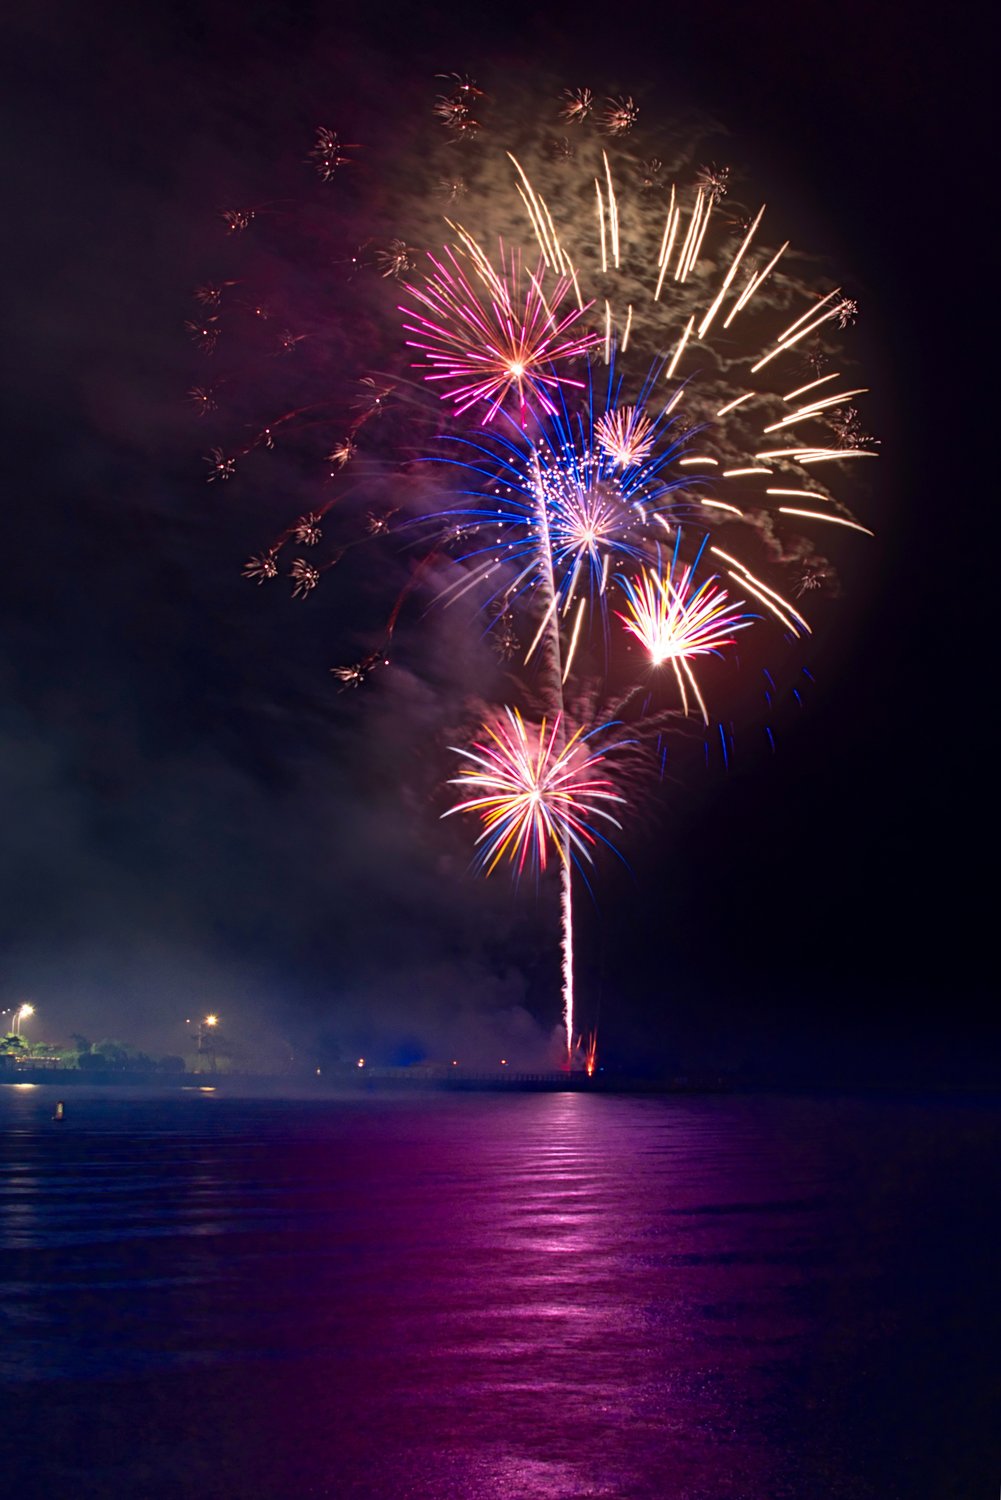 Fireworks in Freeport to be rescheduled Herald Community Newspapers